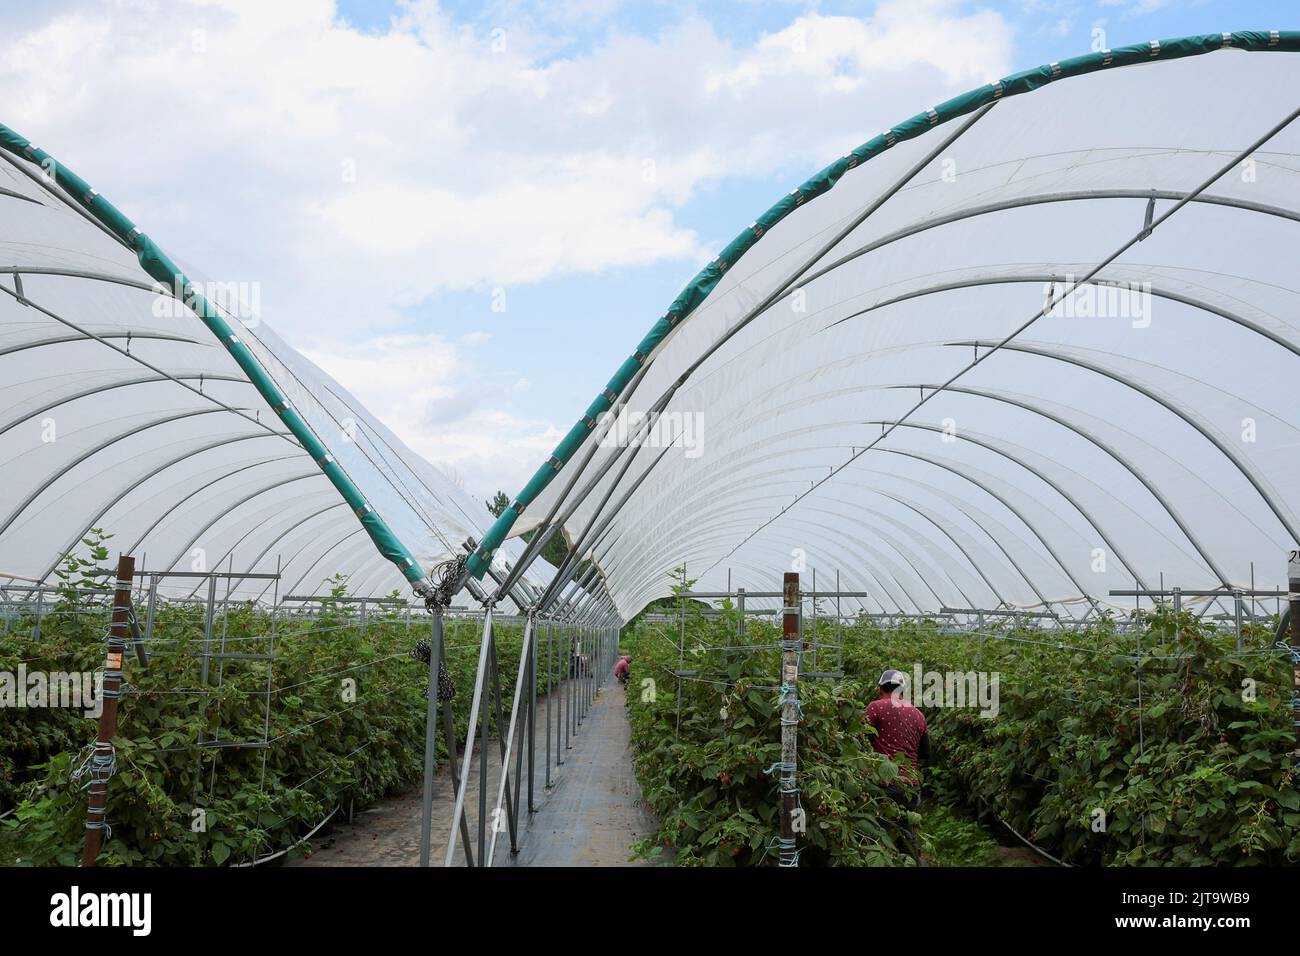 Workers pick berries at Masse, a berry farm operation in Saint Paul d'Abbotsford near Granby, Quebec, Canada August 11, 2022. REUTERS/Christinne Muschi Stock Photo